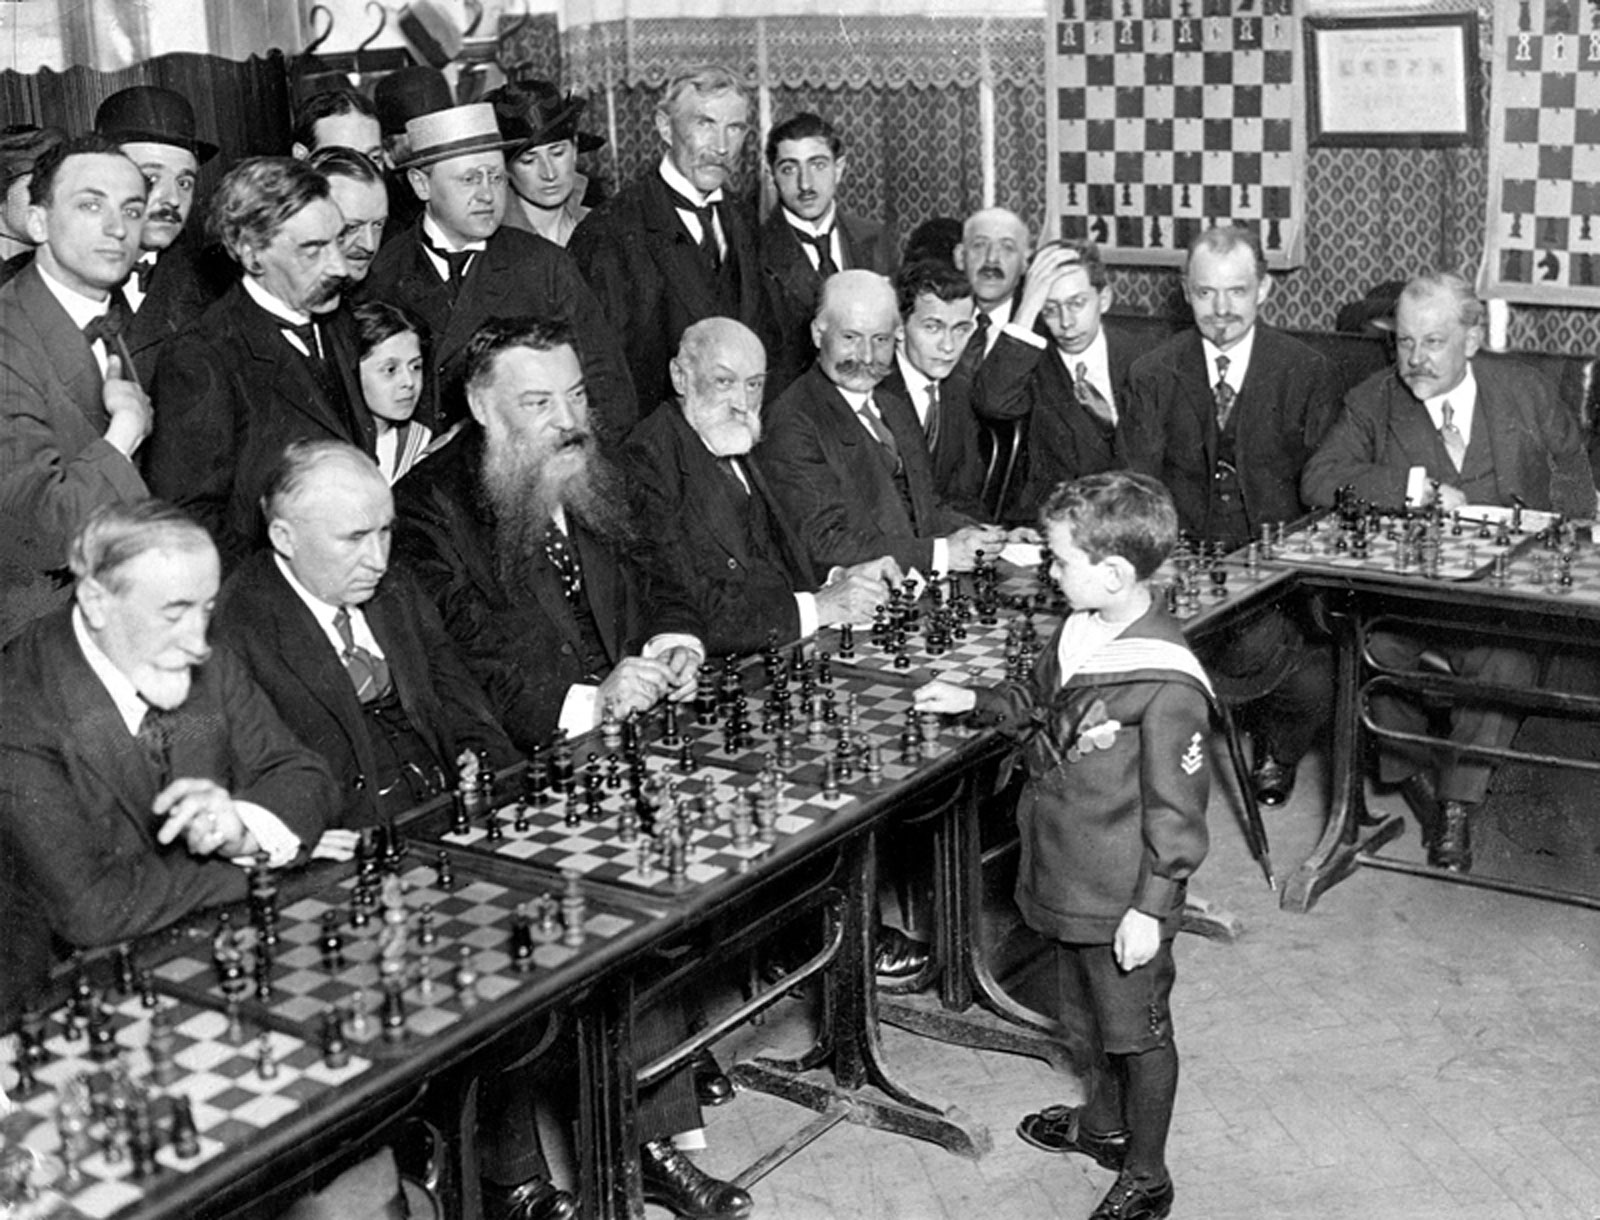 29 - Samuel Reshevsky age 8 defeating several chess masters at once in France 1920